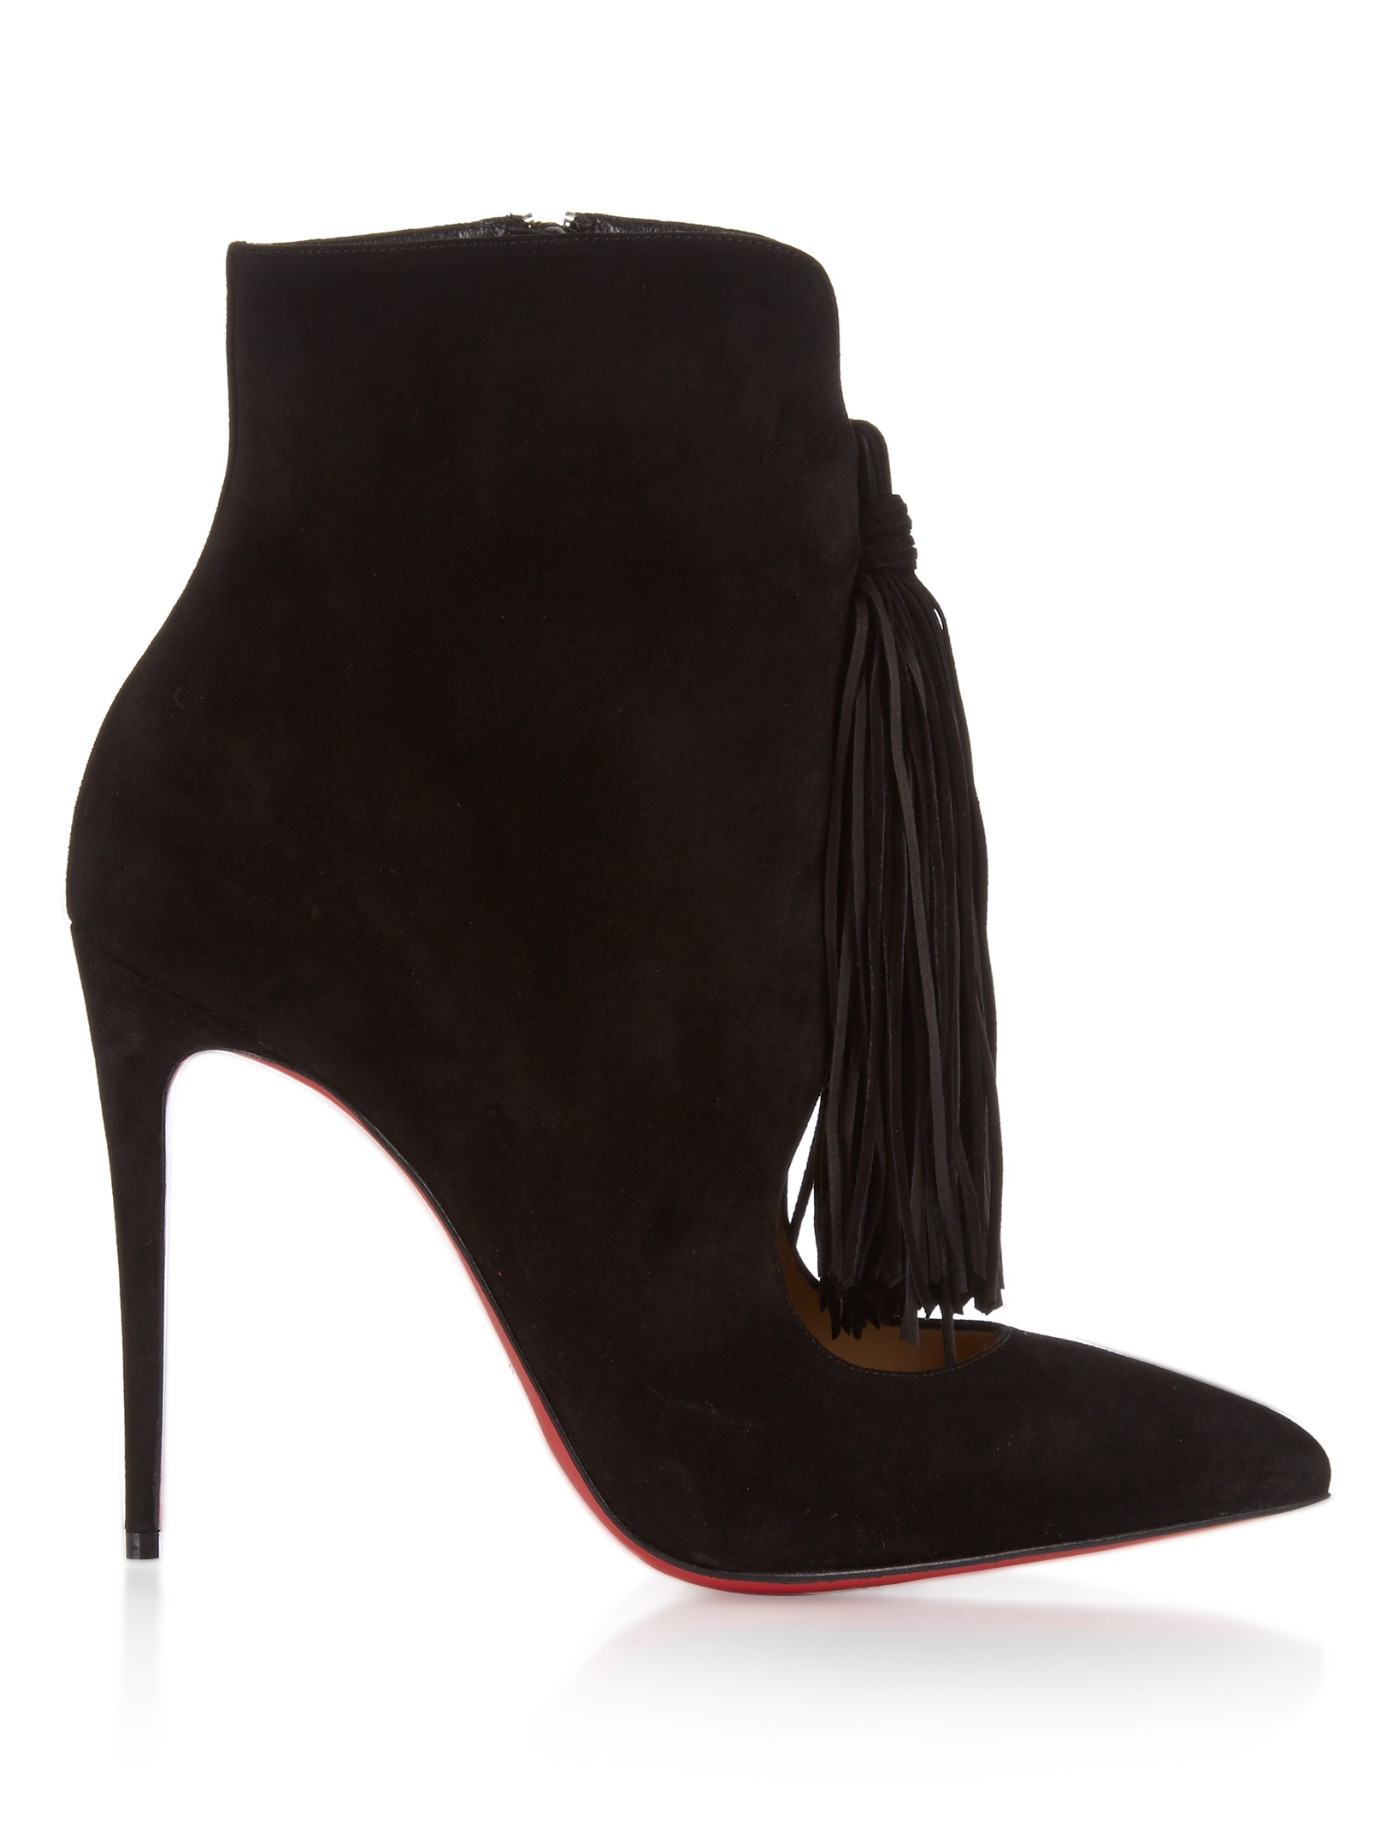 Christian Louboutin Otto Suede Tassel 100mm Ankle Boots in Black | Lyst